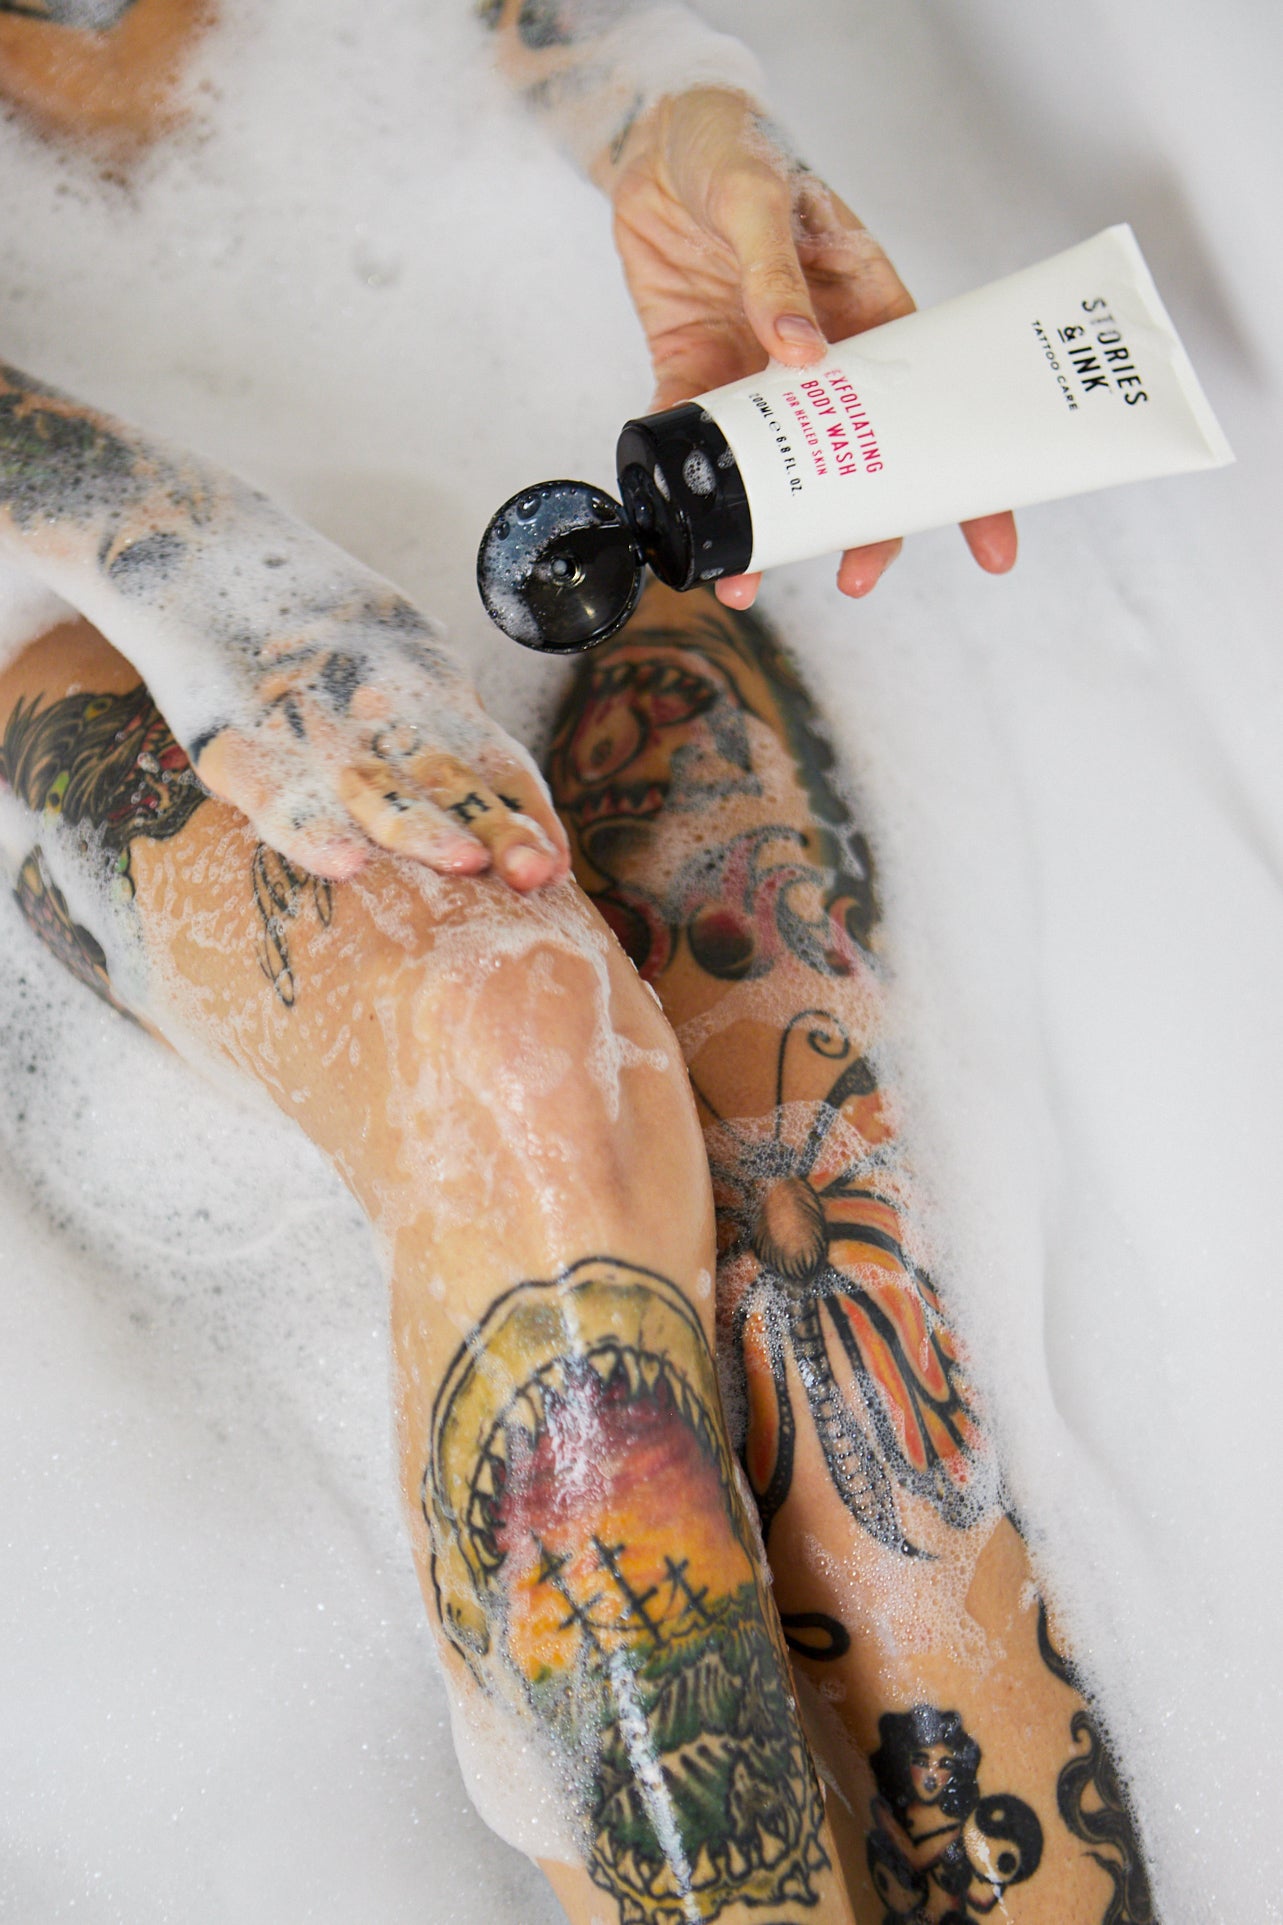 7 Tattoo Aftercare Rules For After Getting a Tattoo  Tattoo Goo